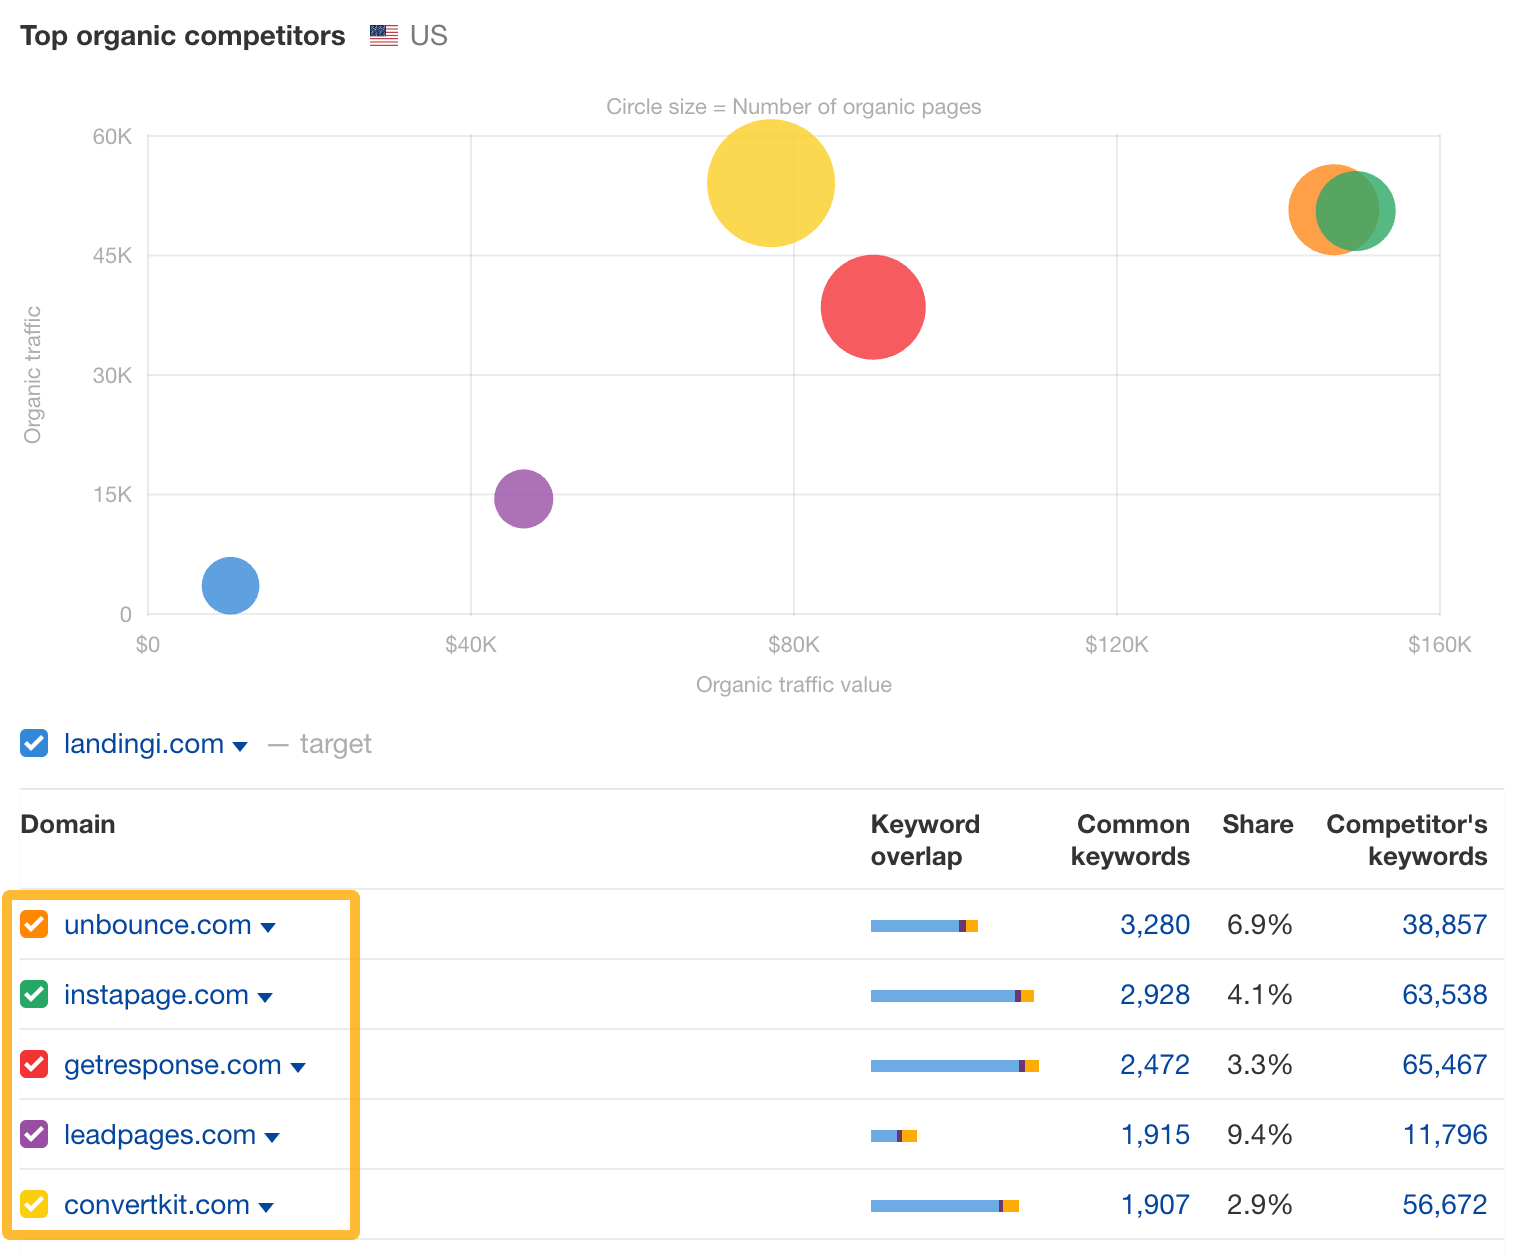 Top organic competitors data from Ahrefs.